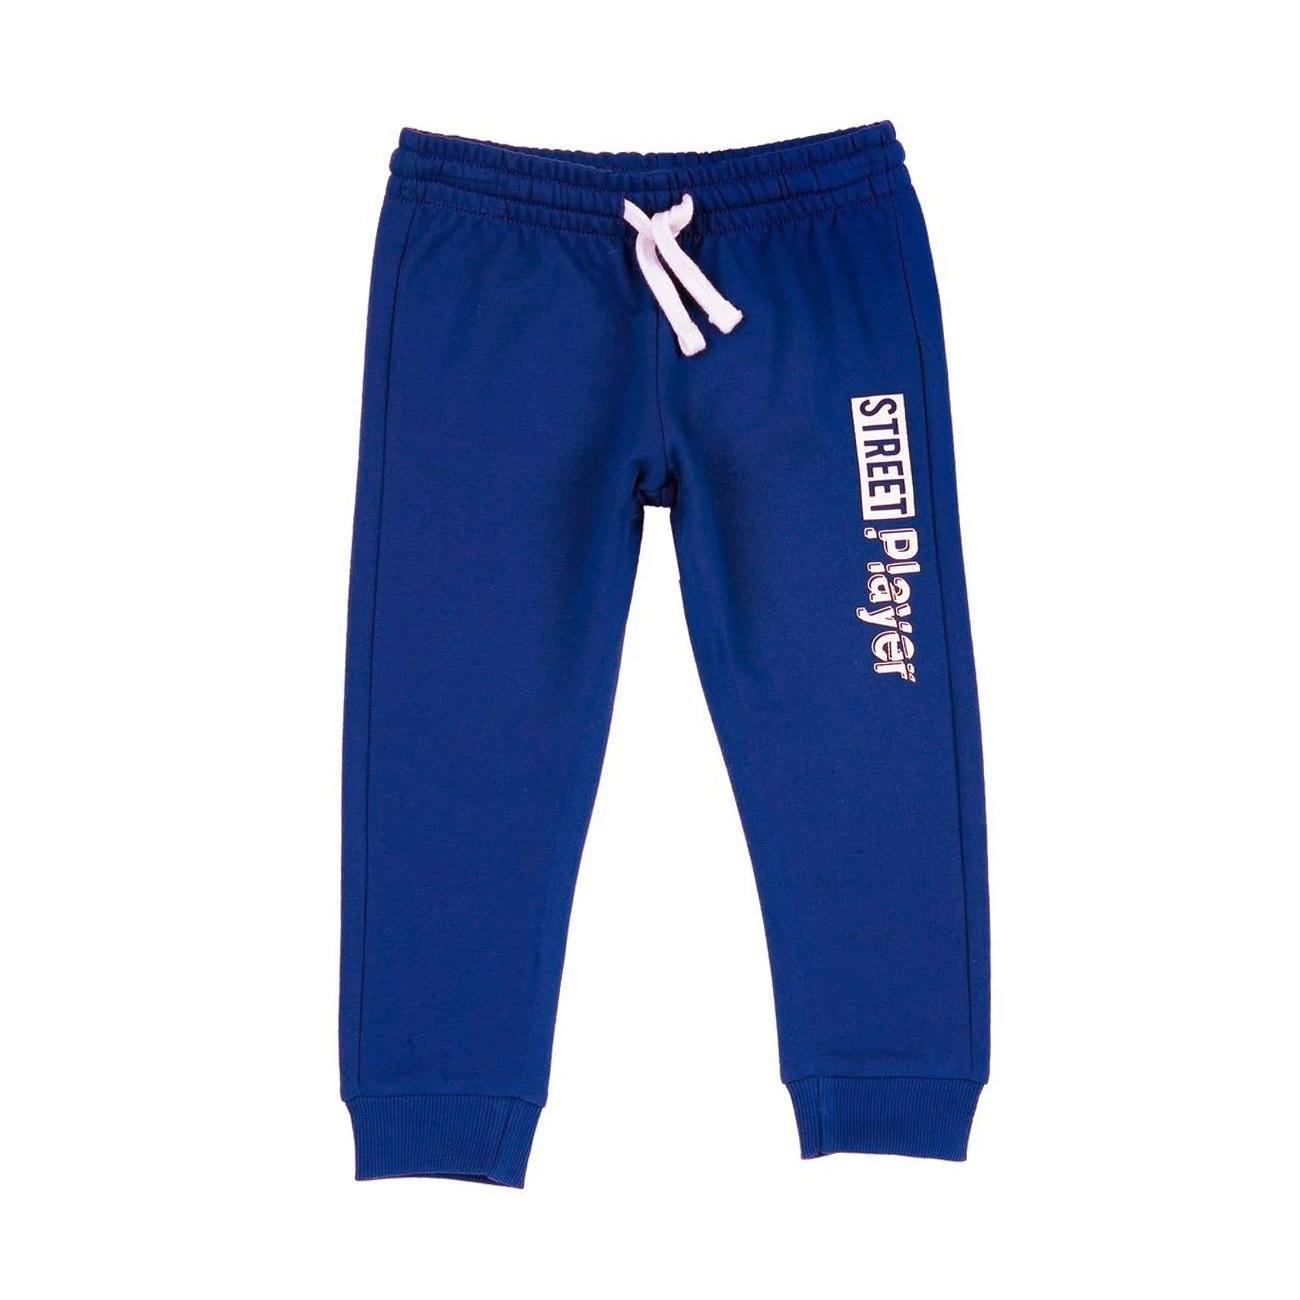 Premium Quality "STREET PLAYER" Printed Sports Trouser For Kids - Brands River